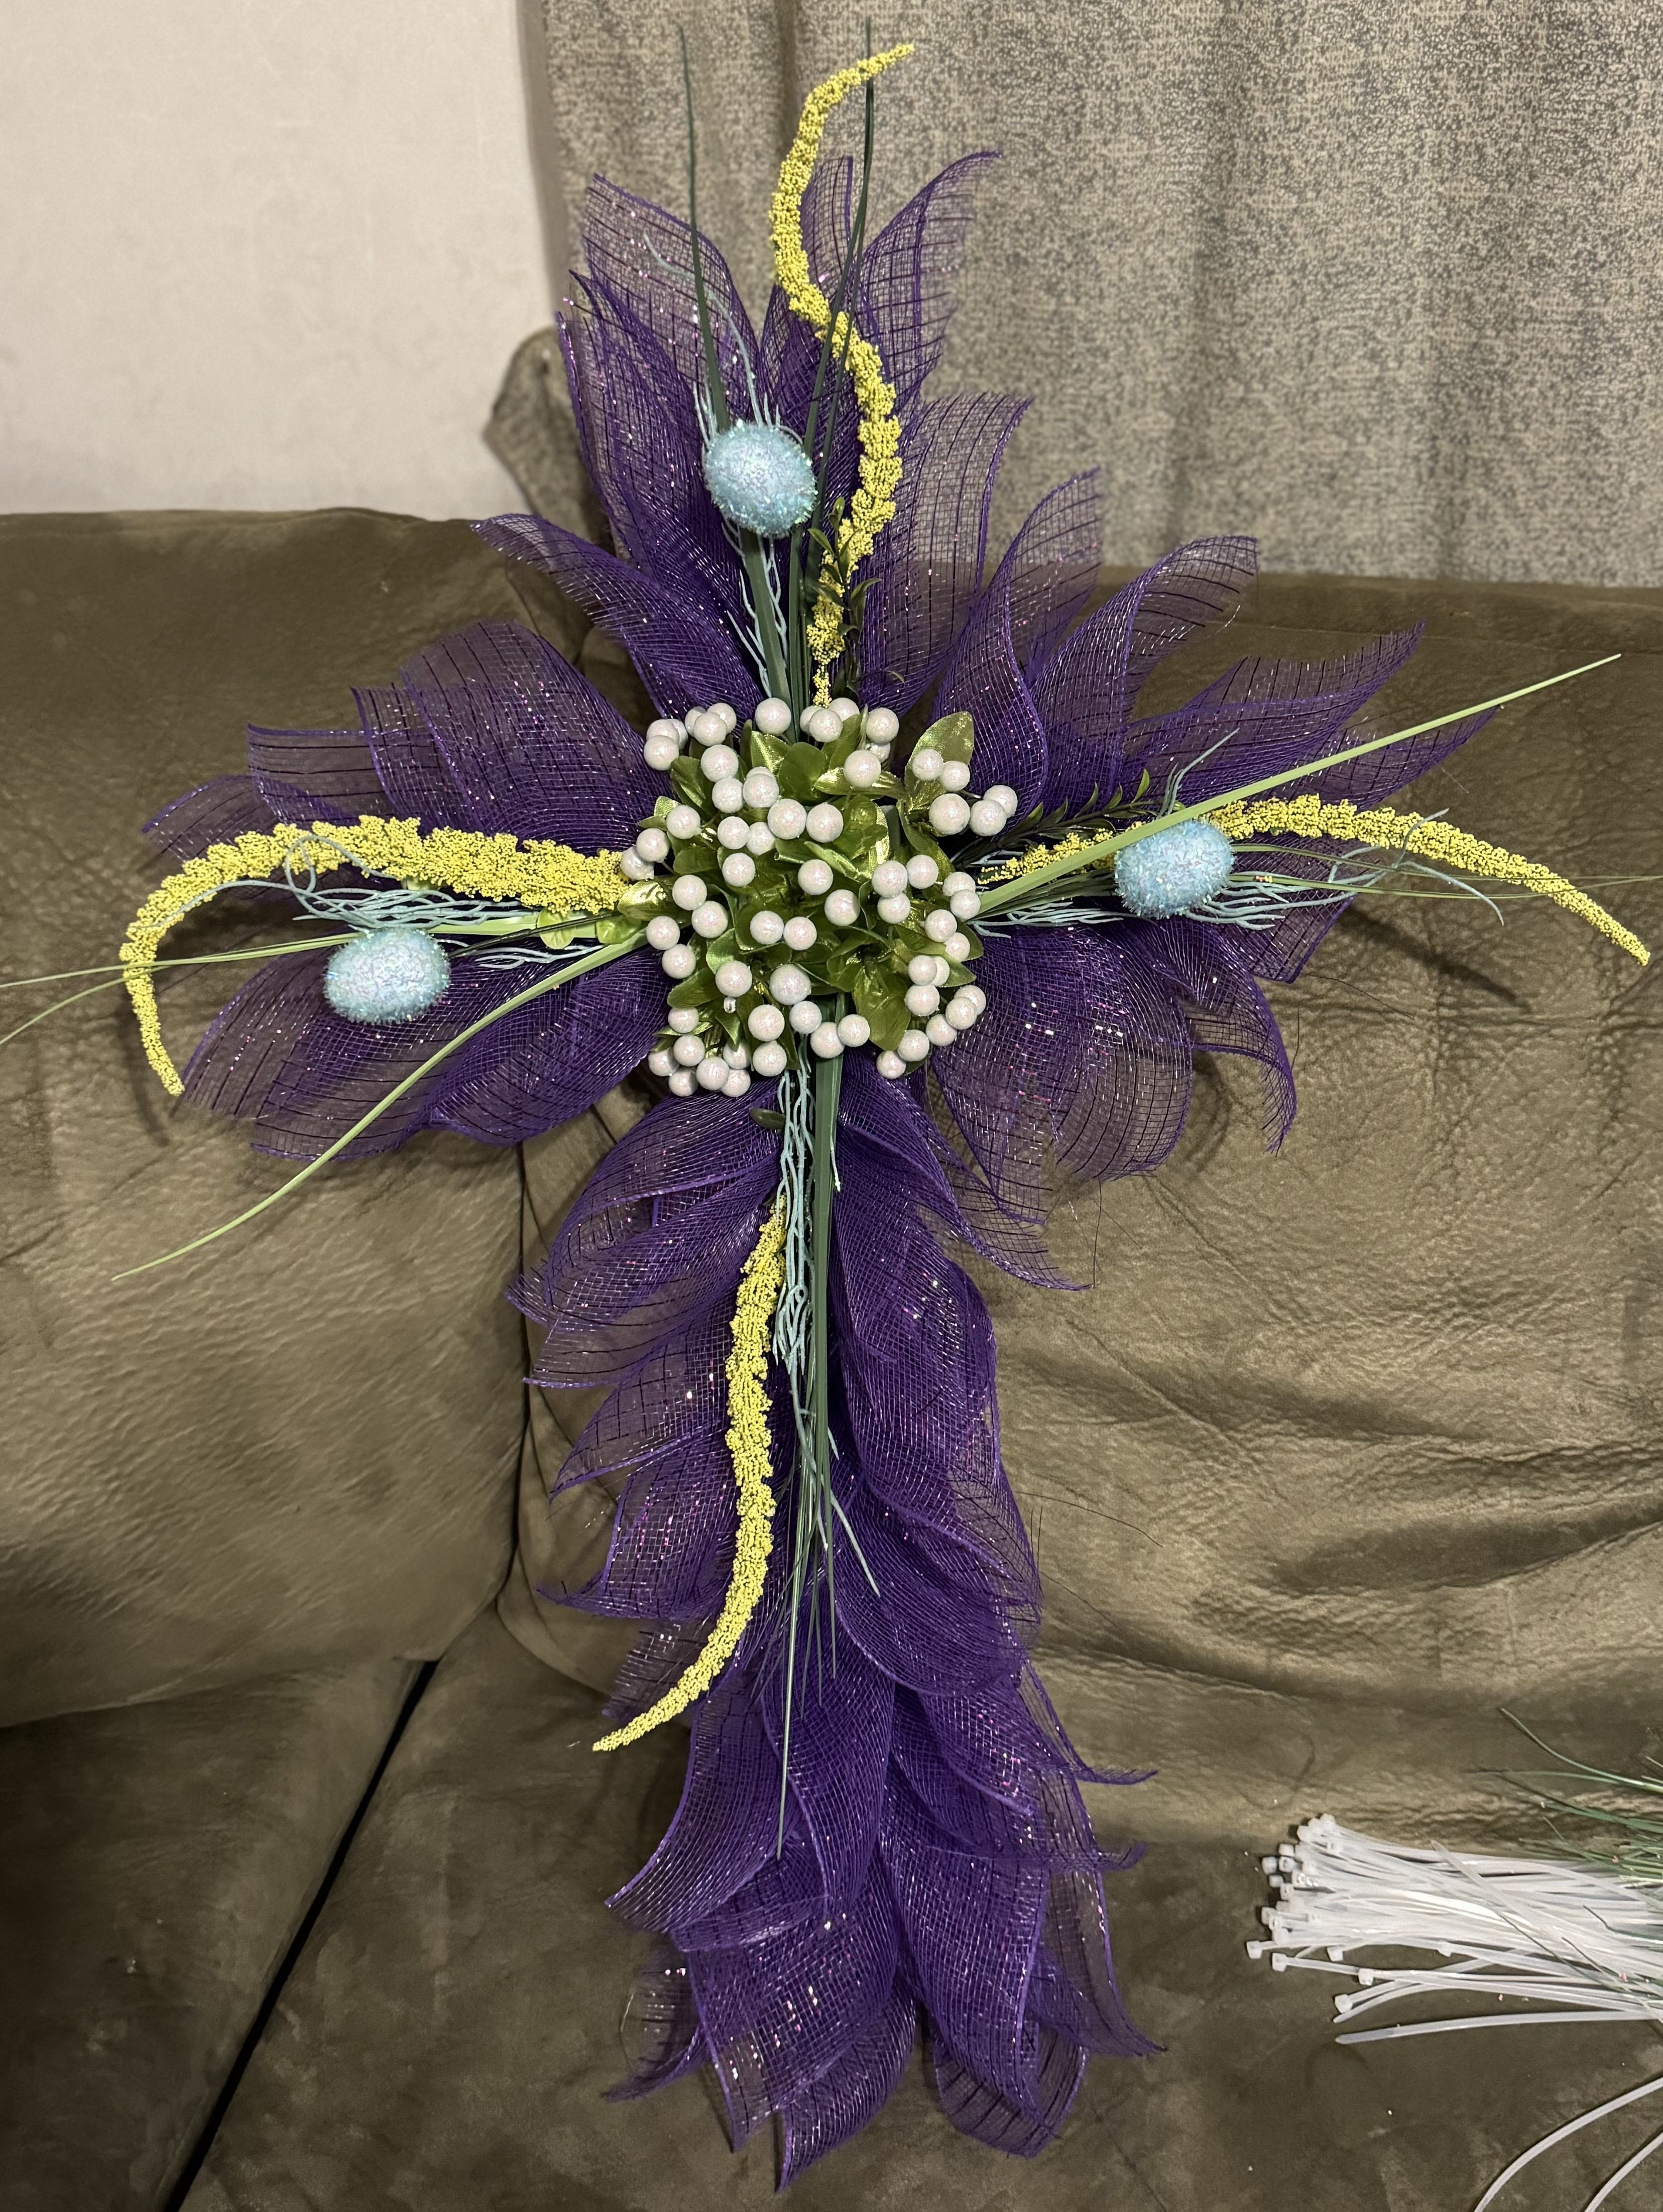 Wreath made of purple ribbon in the shape of a cross with yellow, blue, and white accents. 